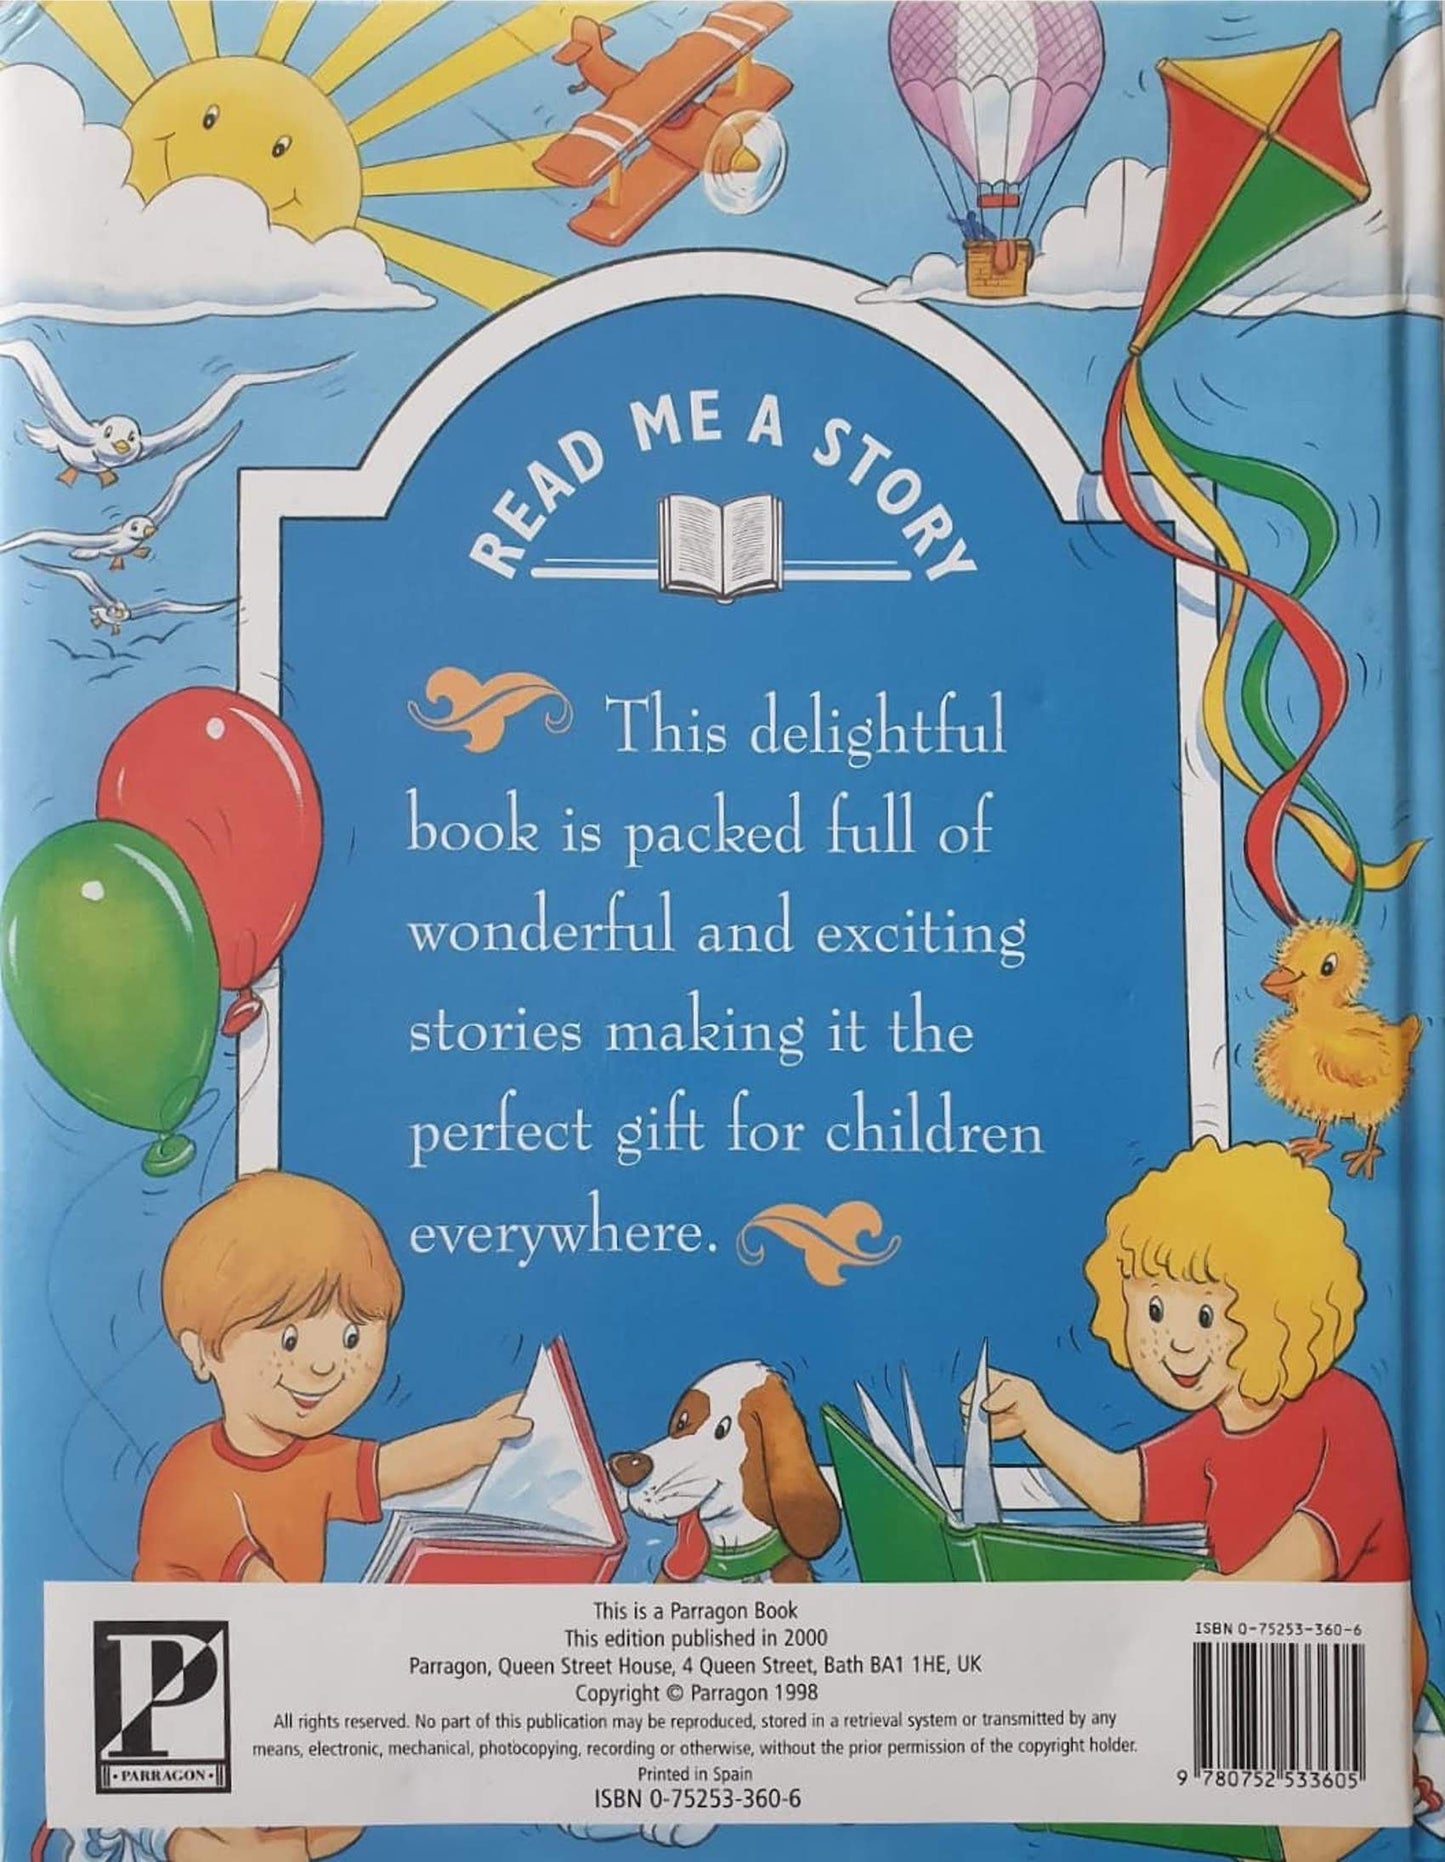 STORYTIME COLLECTION Like New Recuddles.ch  (6322242027705)